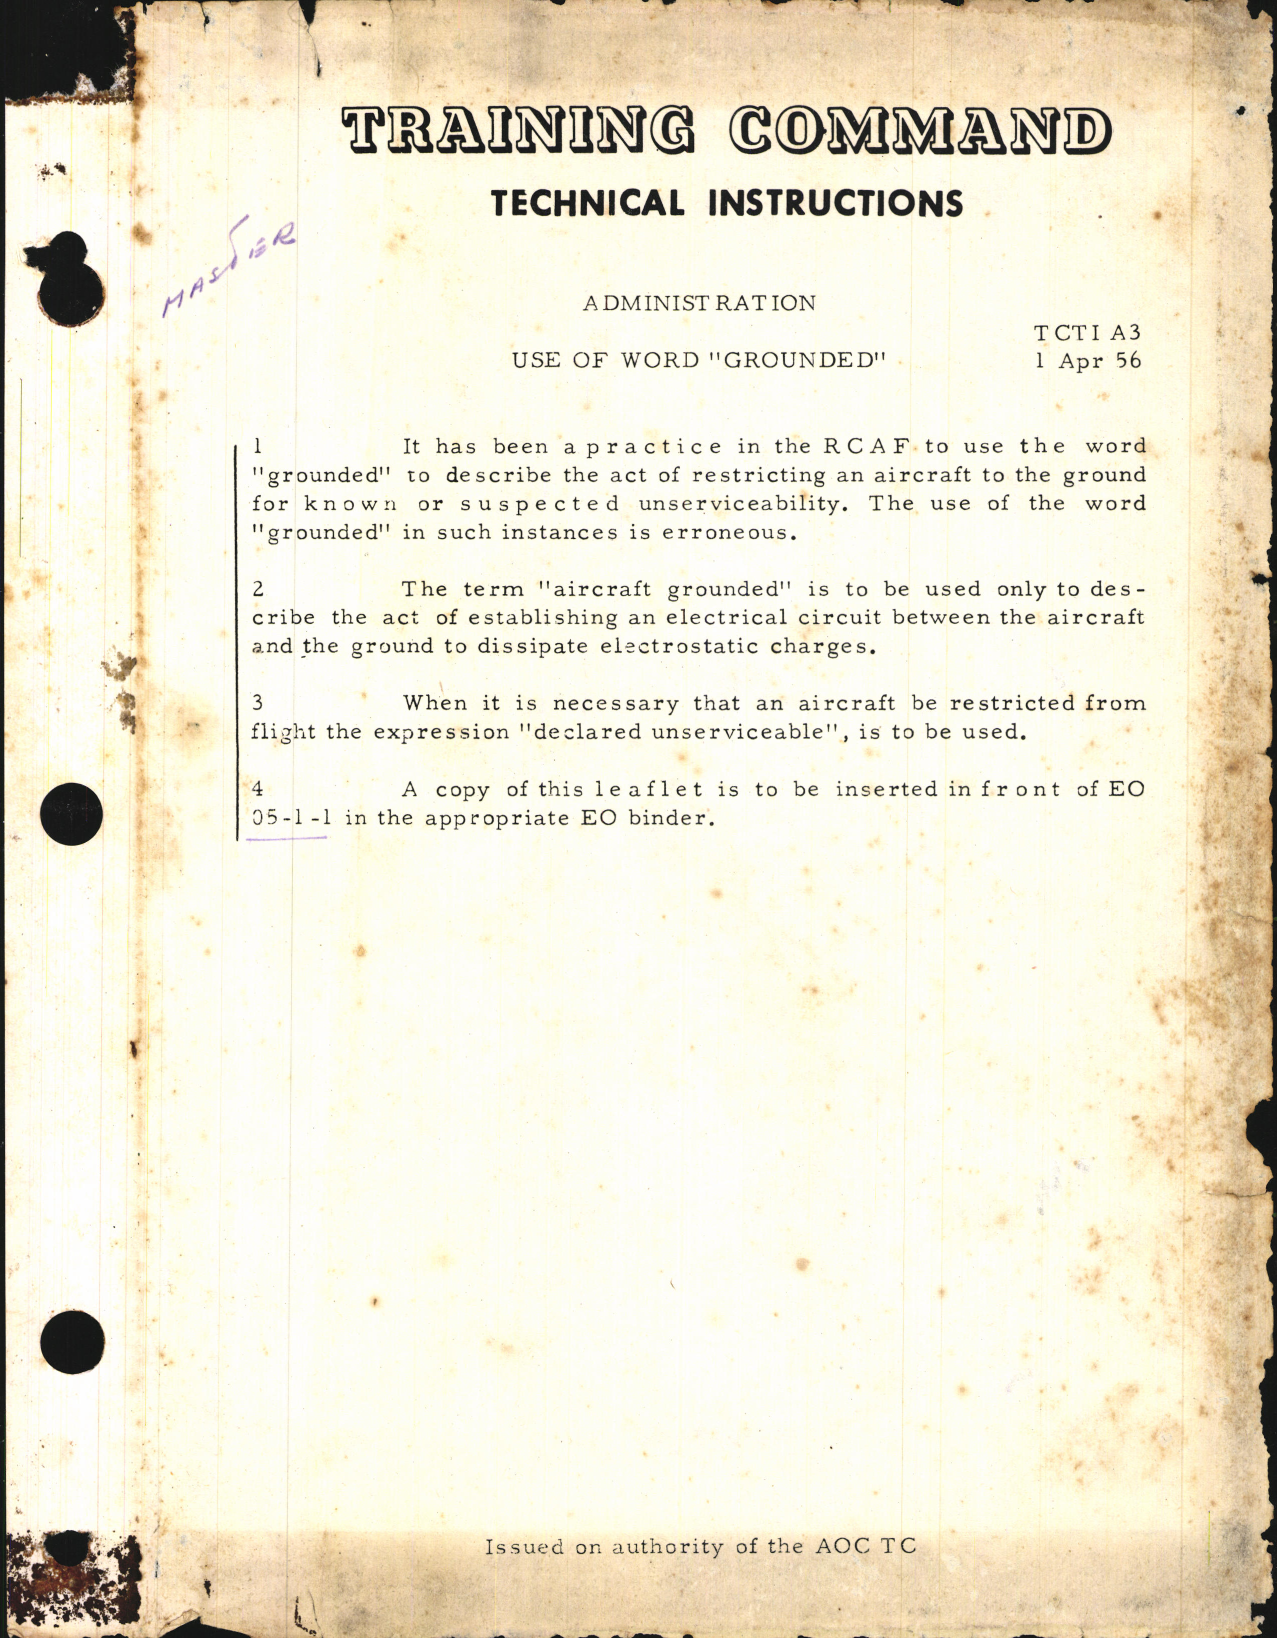 Sample page 1 from AirCorps Library document: Training Command Technical Instructions for Administration Use of Word 